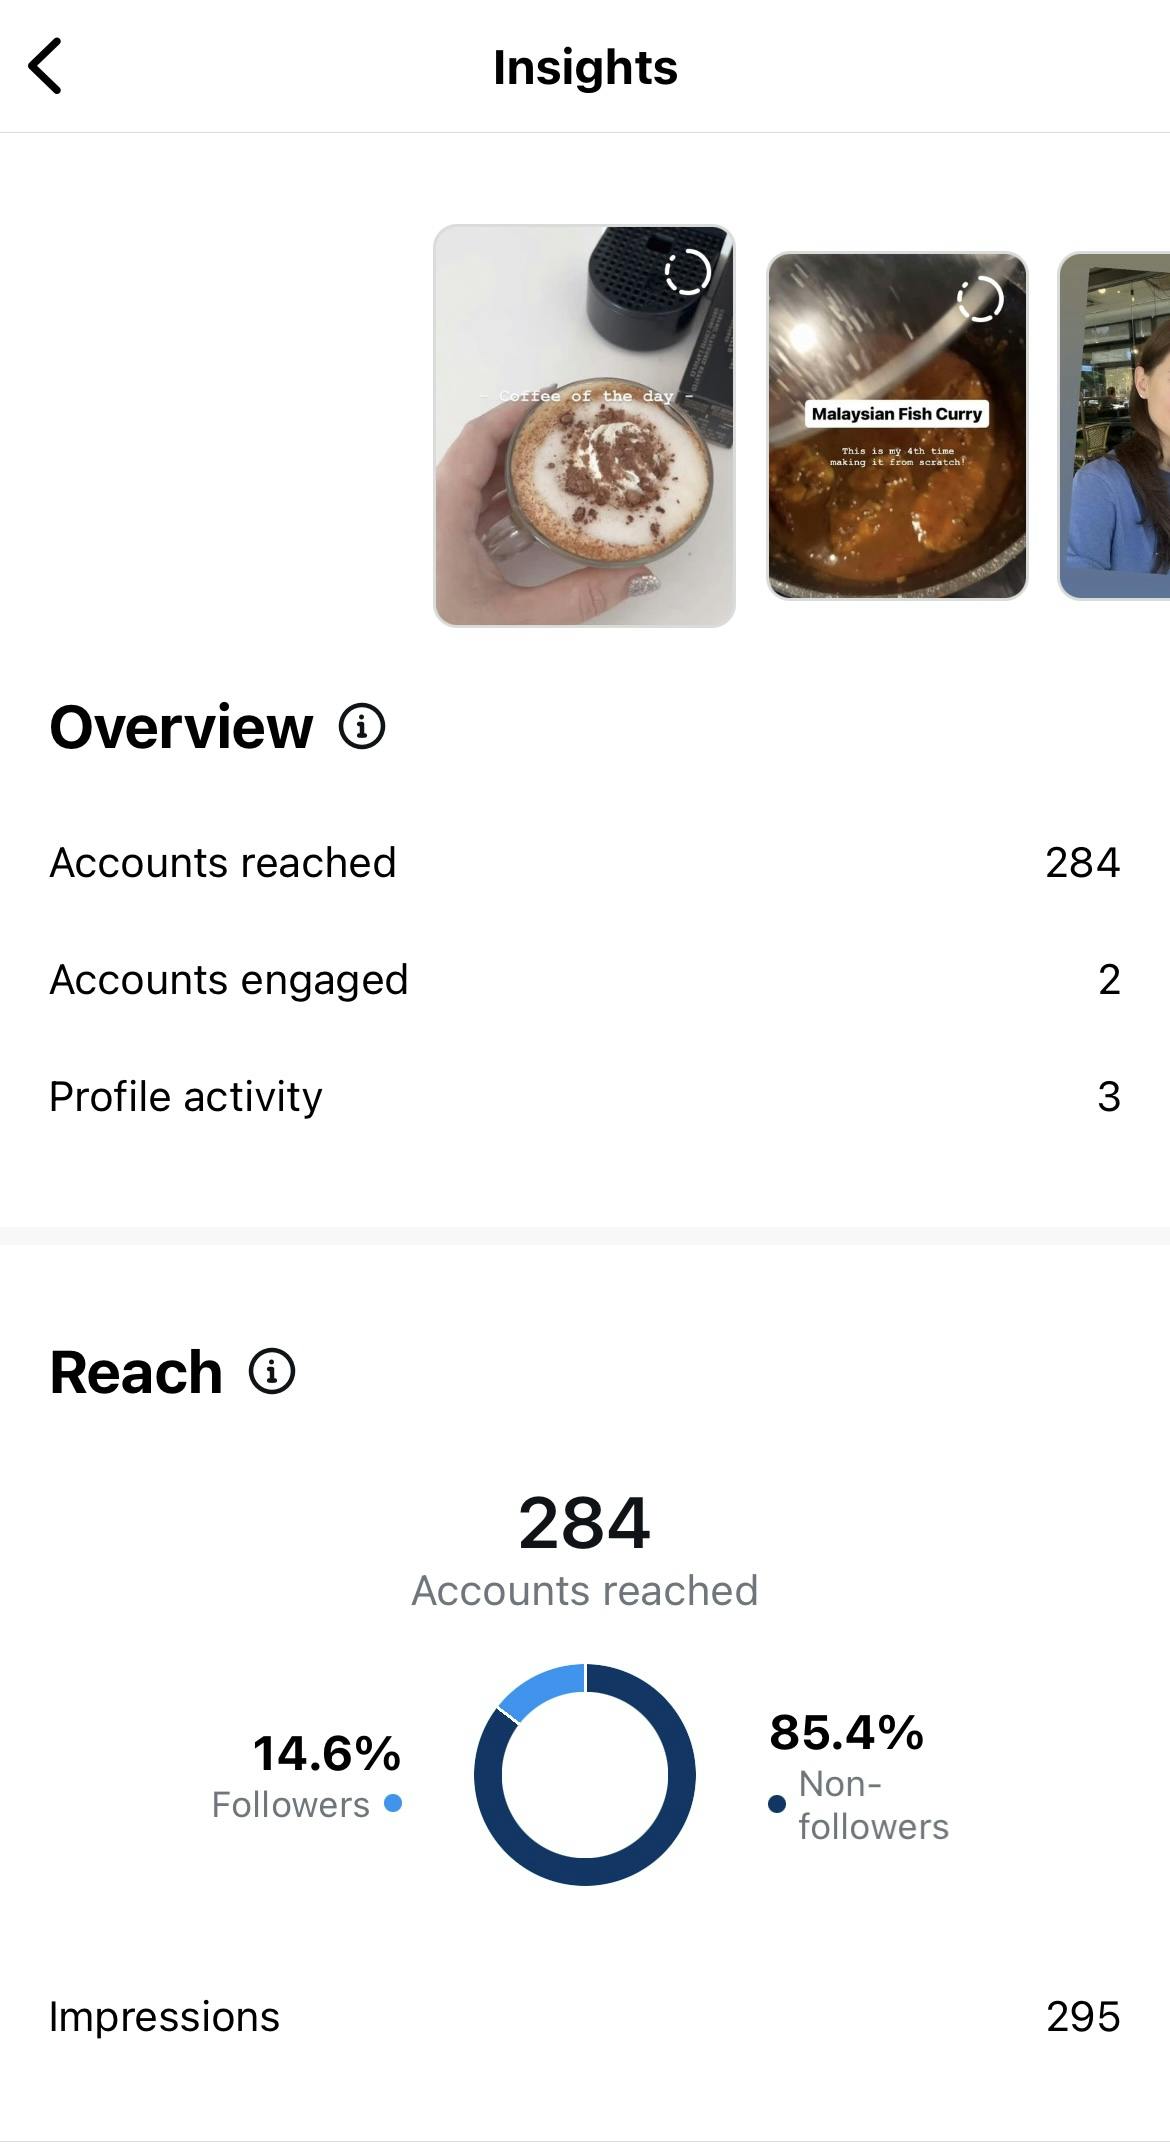 Instagram story expanded insights including reach and impressions

